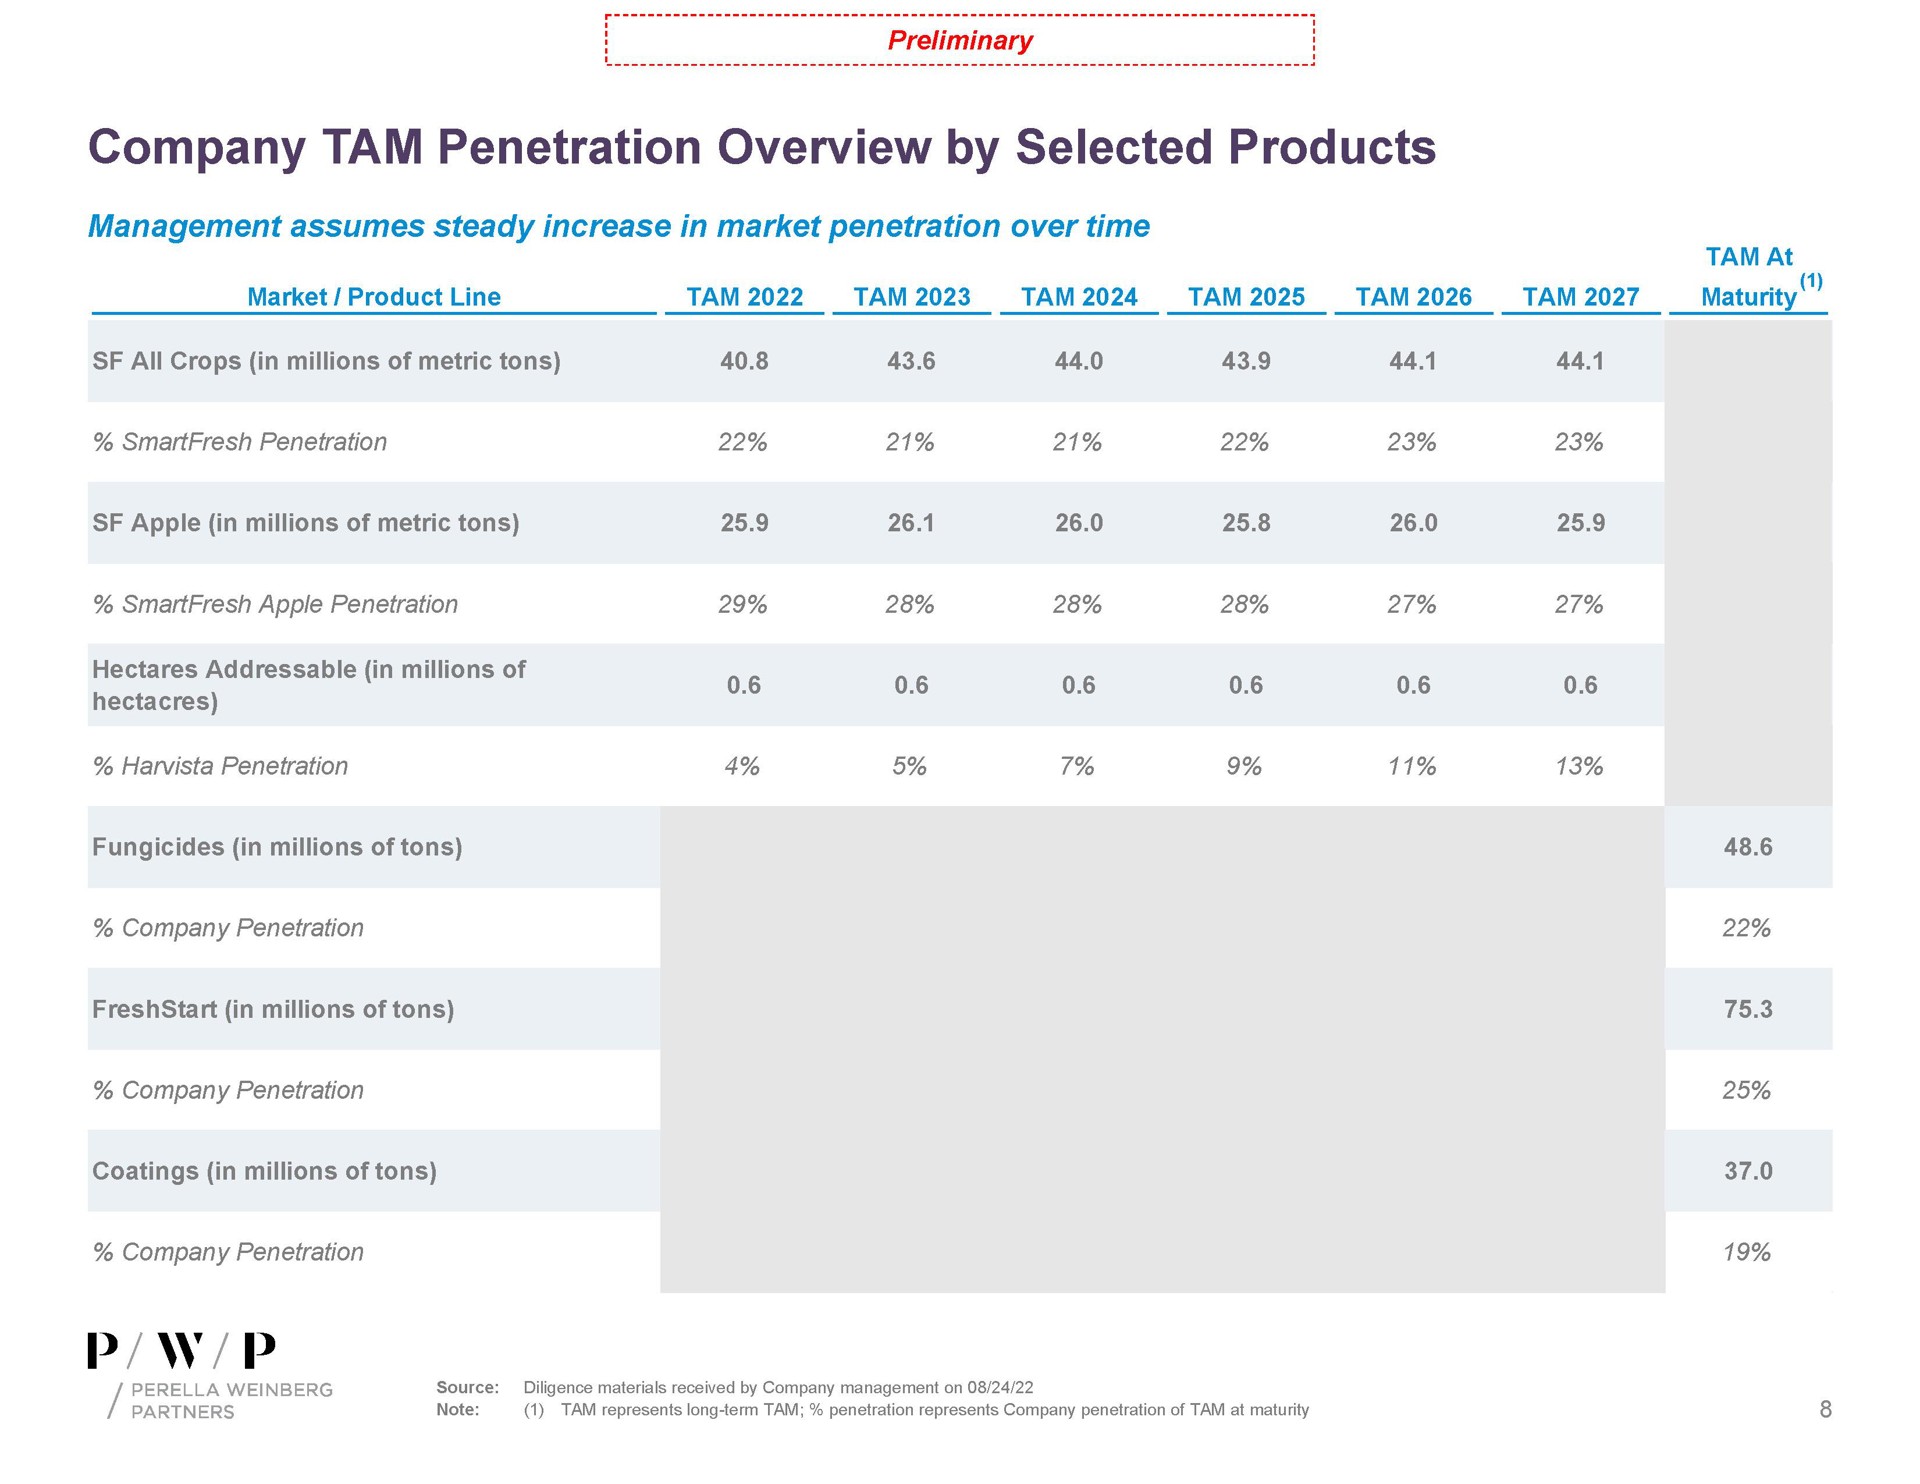 company tam penetration overview by selected products | Perella Weinberg Partners